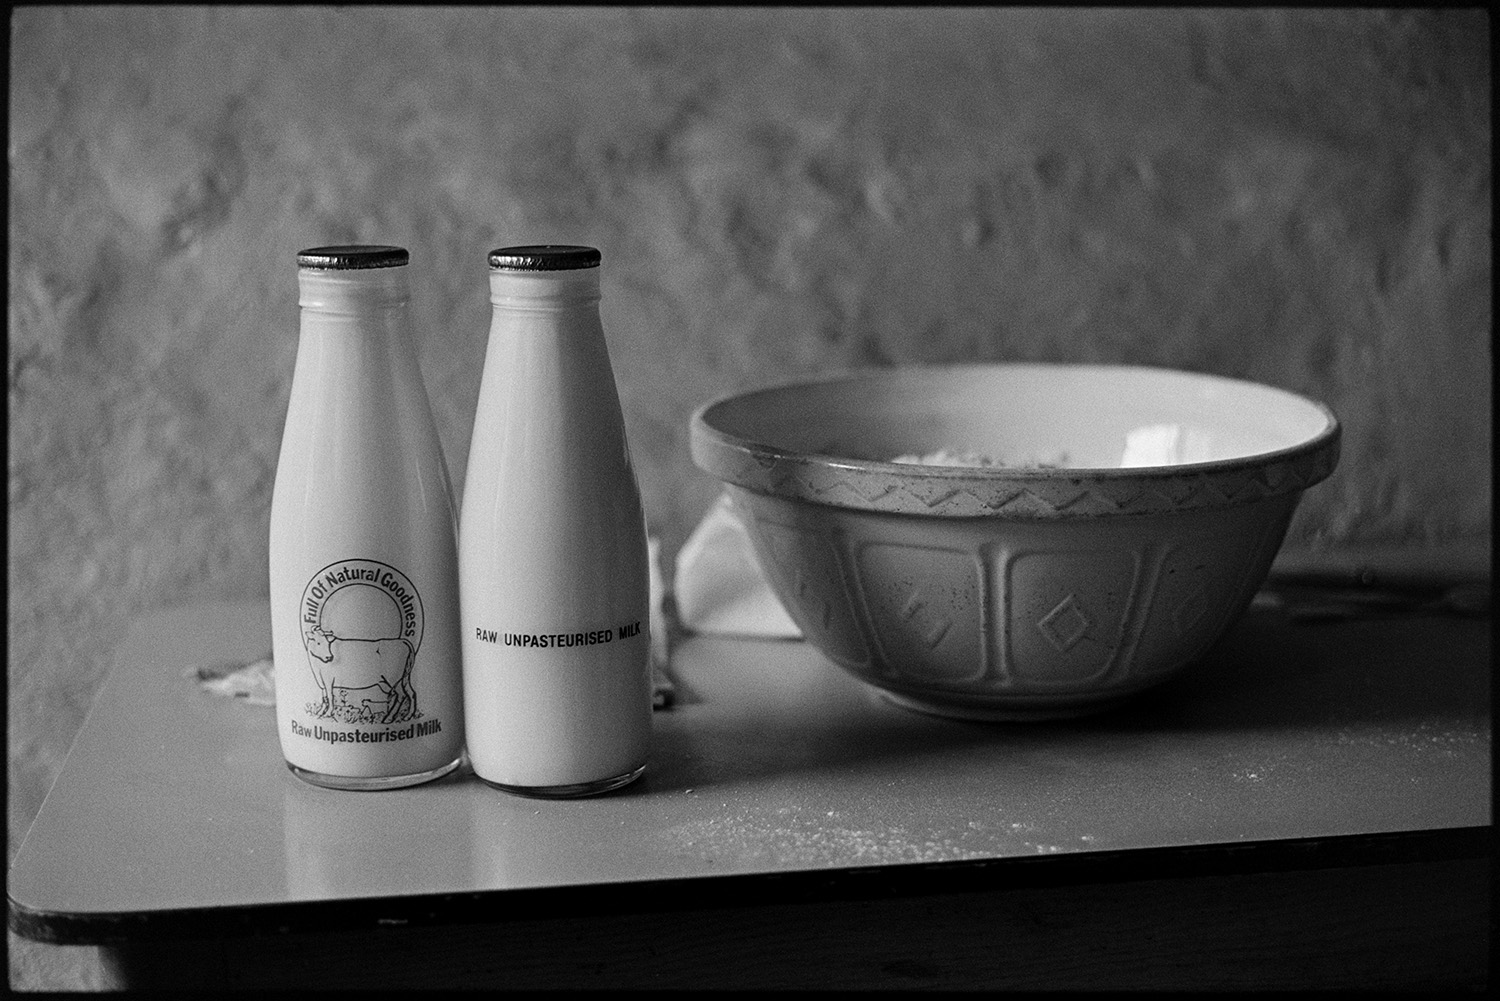 Milk bottles and pastry bowl on table at cottage door.
[Two full bottles of milk labelled 'Raw Unpasteurised Milk - Full of Natural Goodness' next to a mixing bowl  on a table at Chaplands, Cottage, Beaford.]